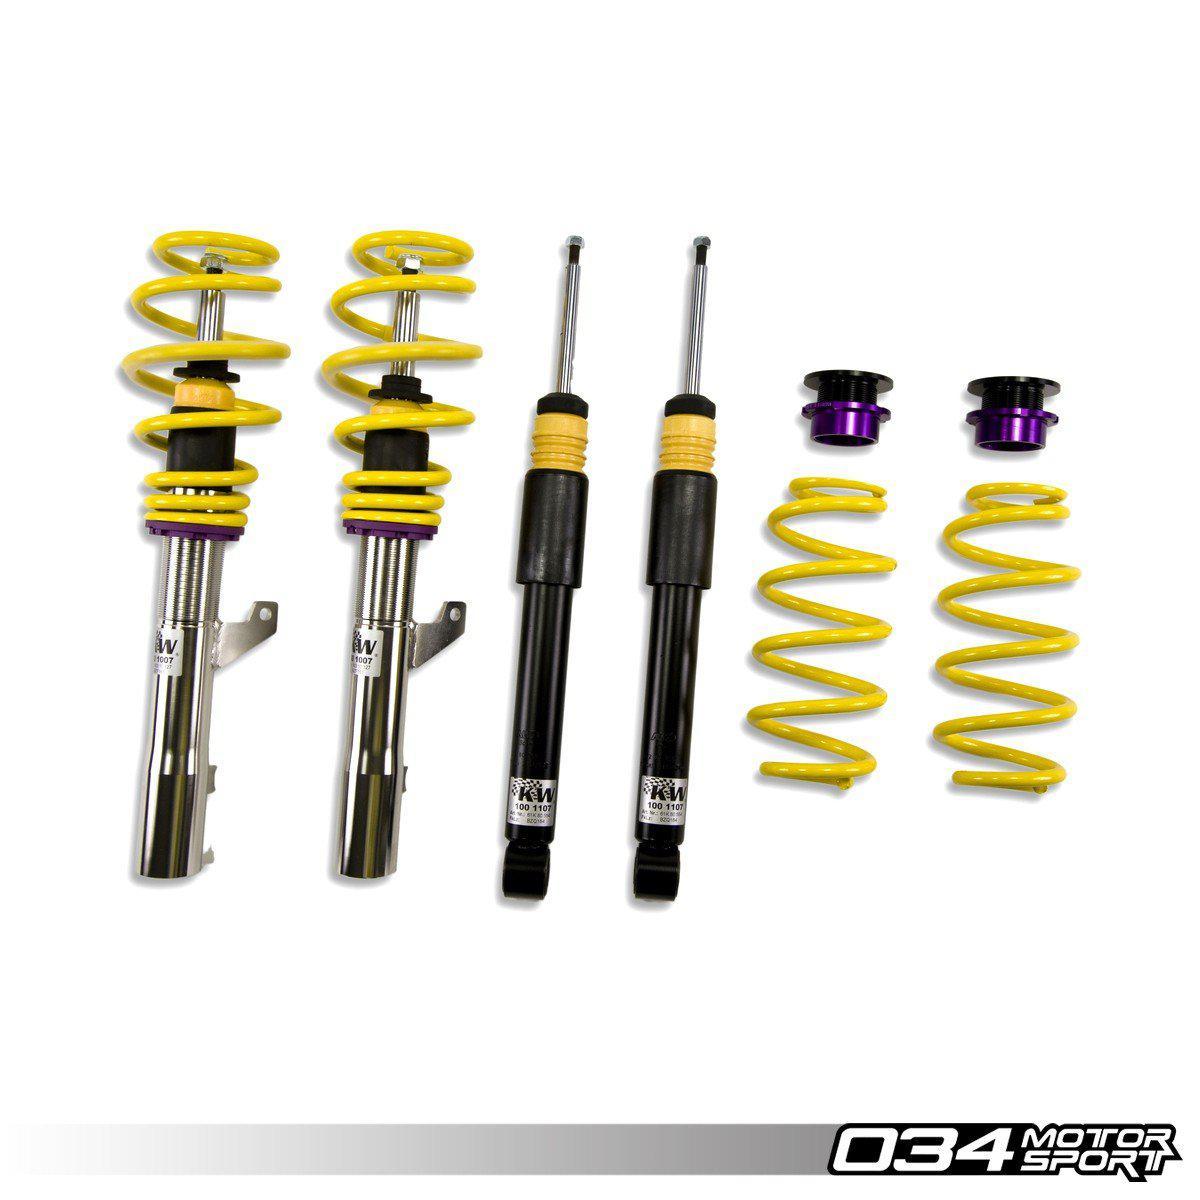 KW Variant 2 Coilover Suspension, B8 Audi A4/S4 Avant Quattro With Edc-A Little Tuning Co